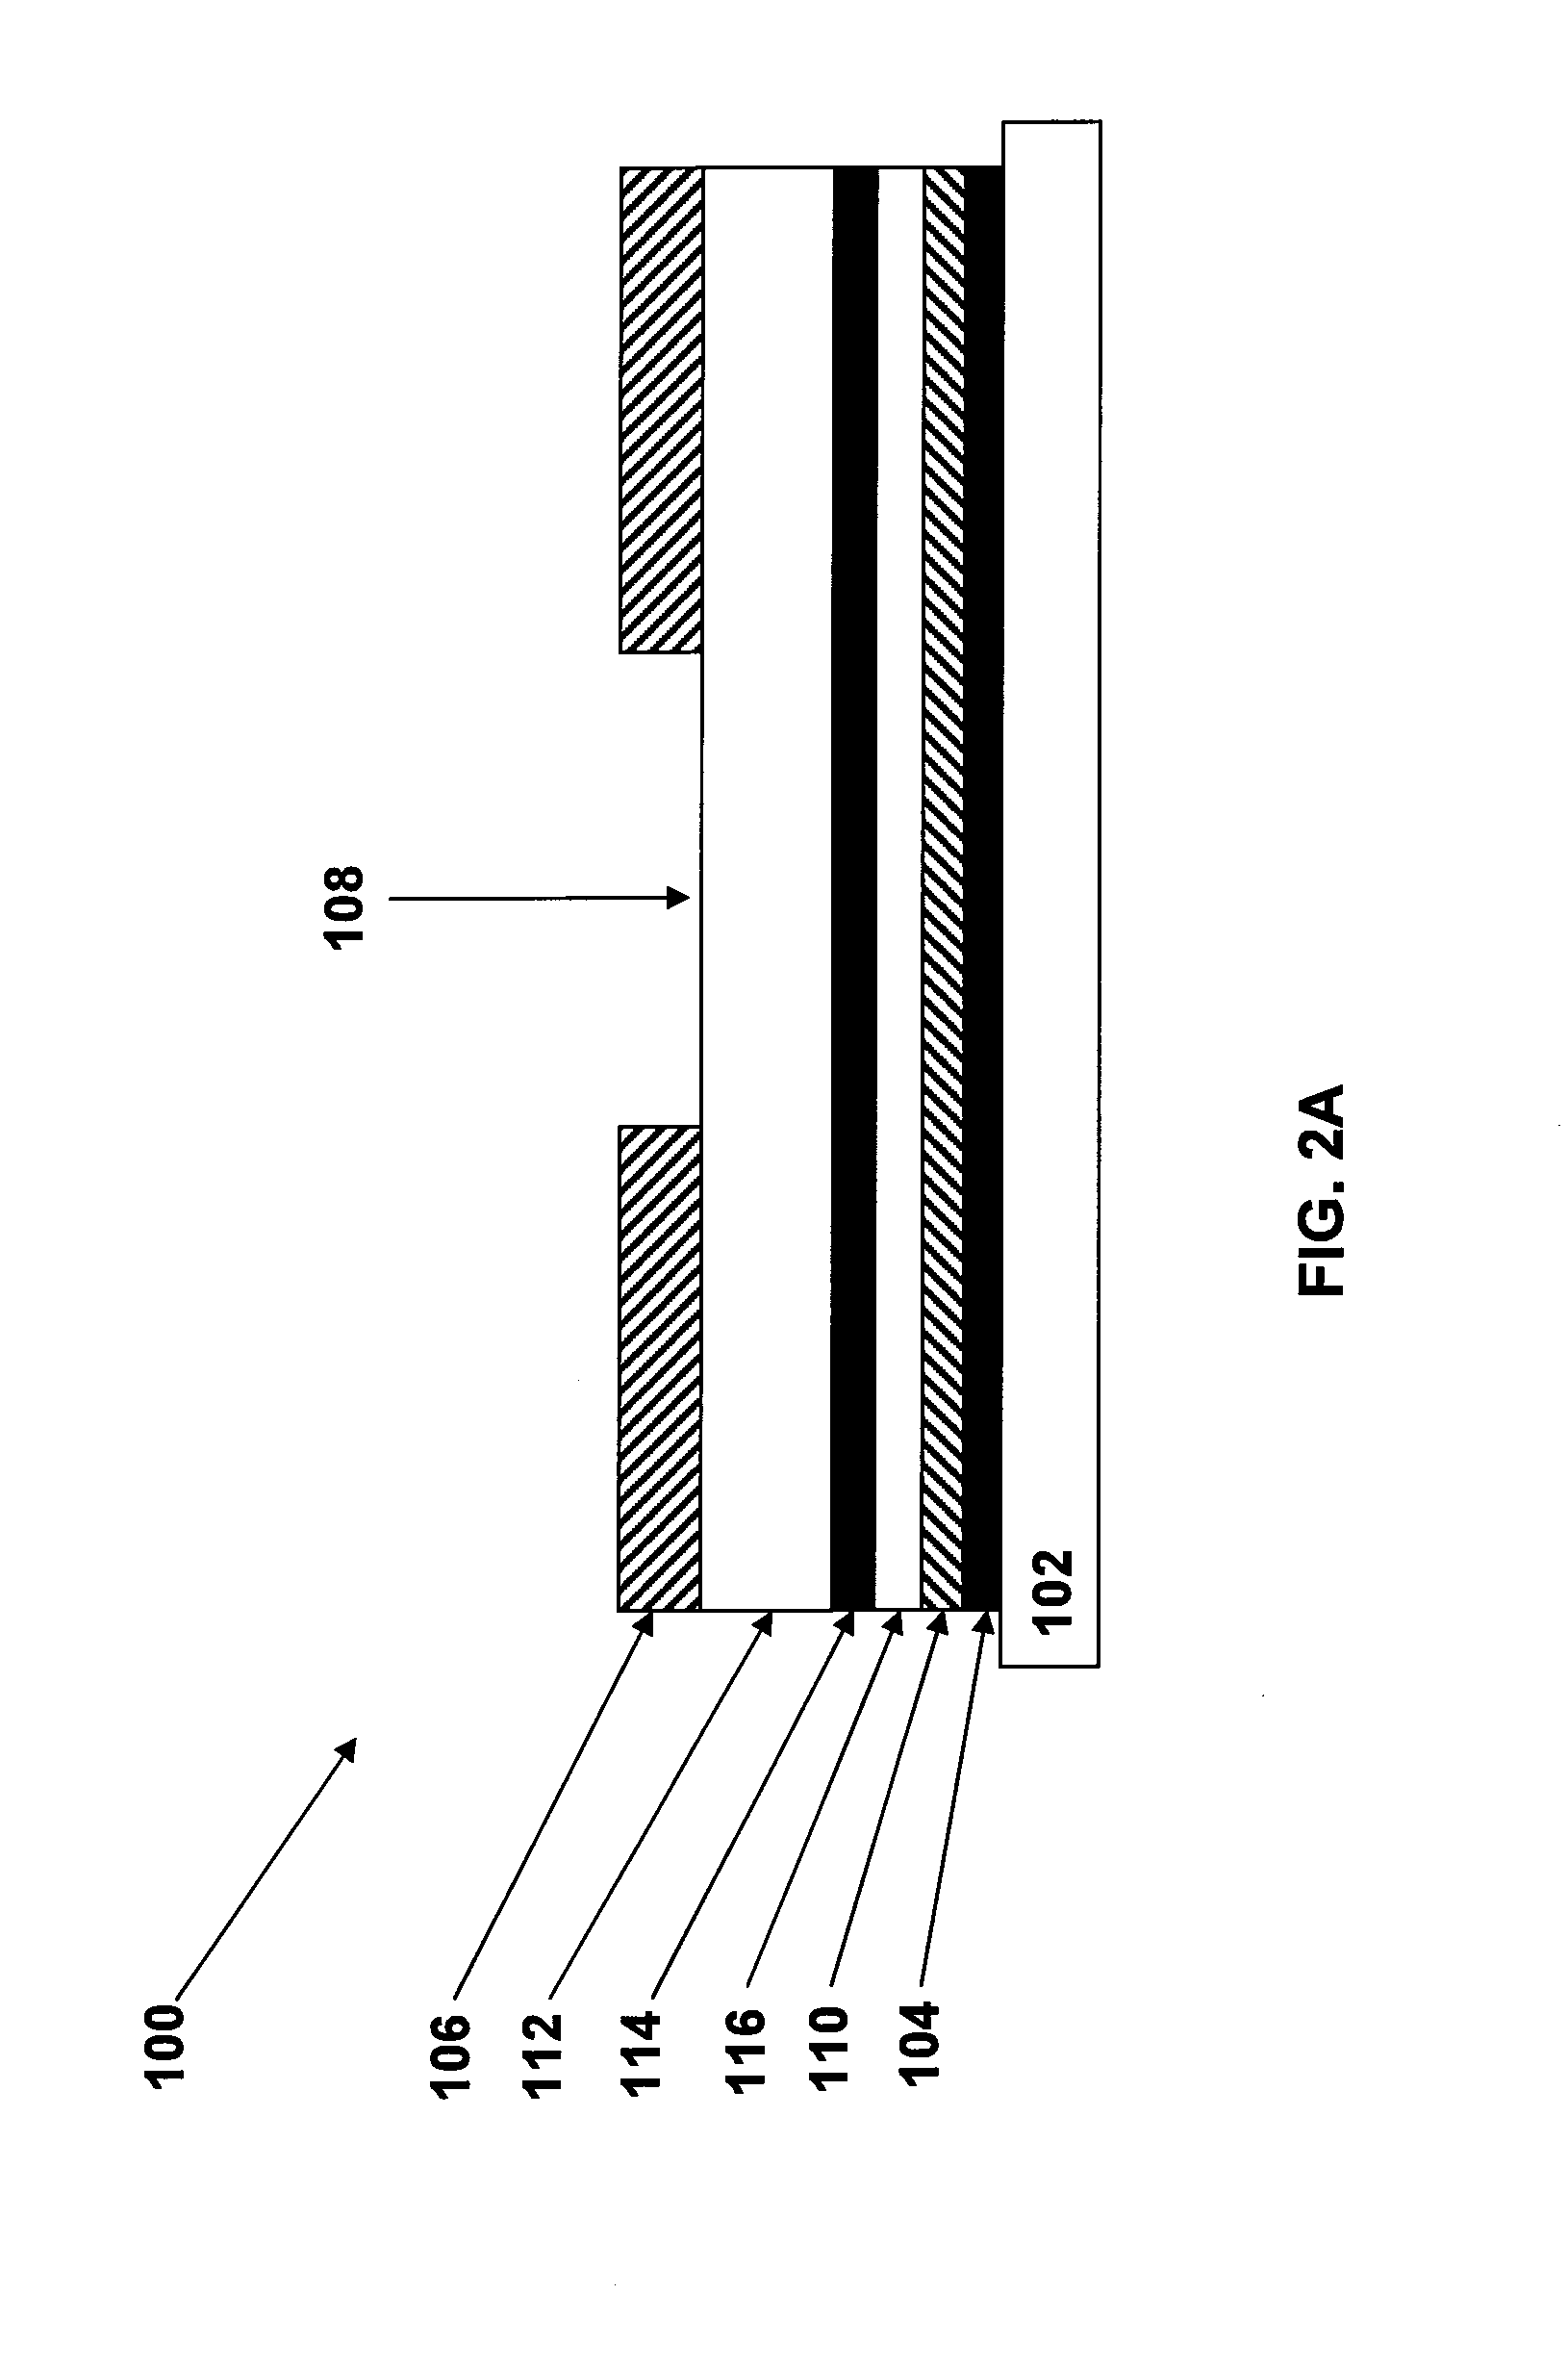 Layered enzyme compositions for use with analyte sensors